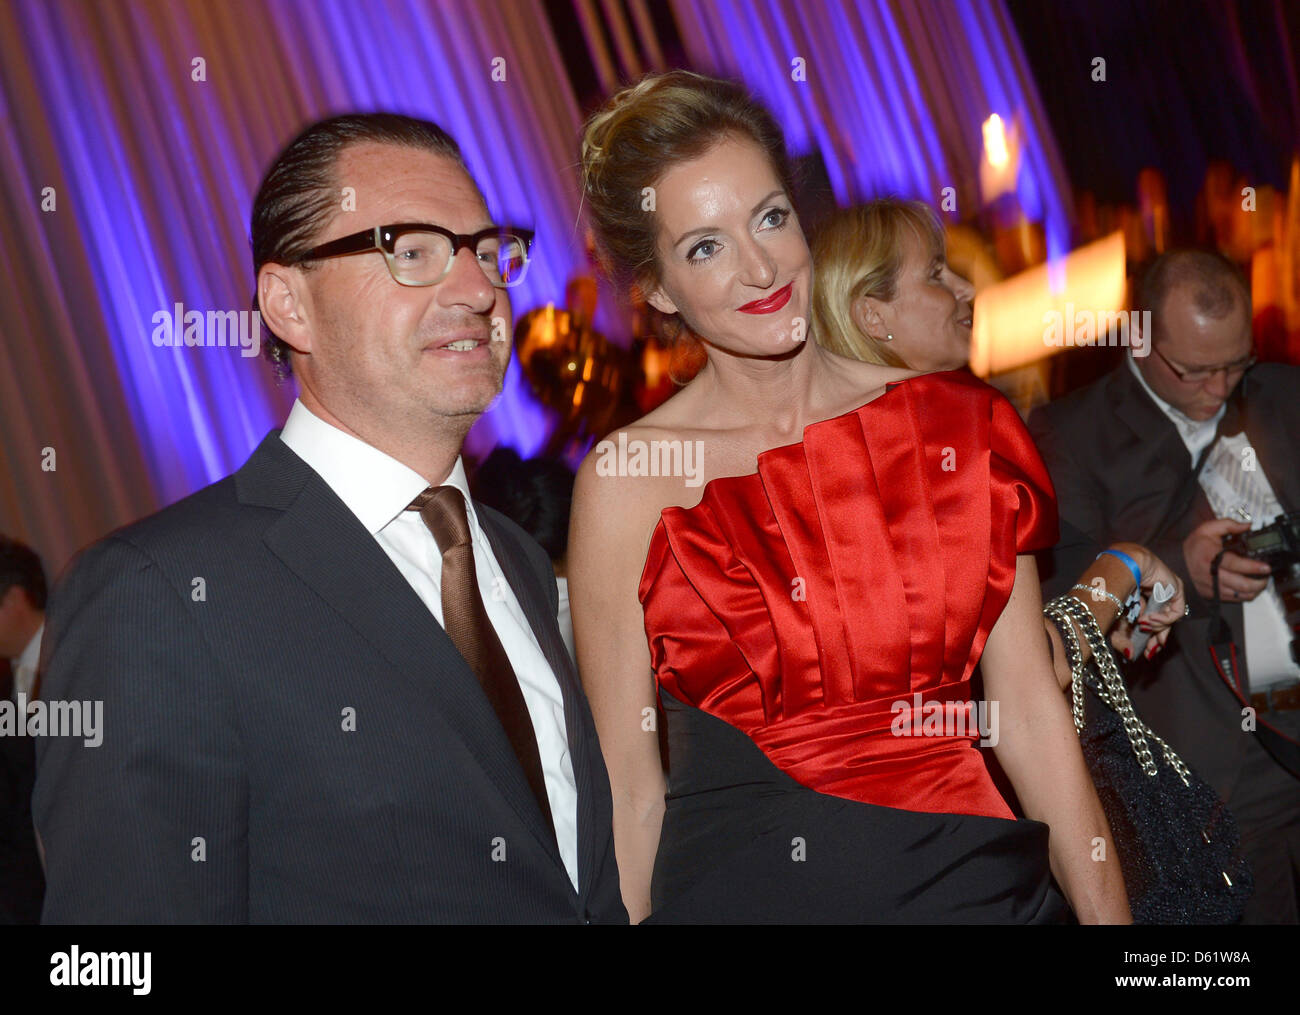 Chief editor of German newspaper 'Bild' Kai Diekmann and his wife Katja Kessler at the festive event at the Axel Springer building in Berlin, Germany, 02 May 2012. The publishing house and multimedia company Axel Springer AG celebrates the 100th birthday of its founder Axel Springer. Photo: Britta Pedersen Stock Photo